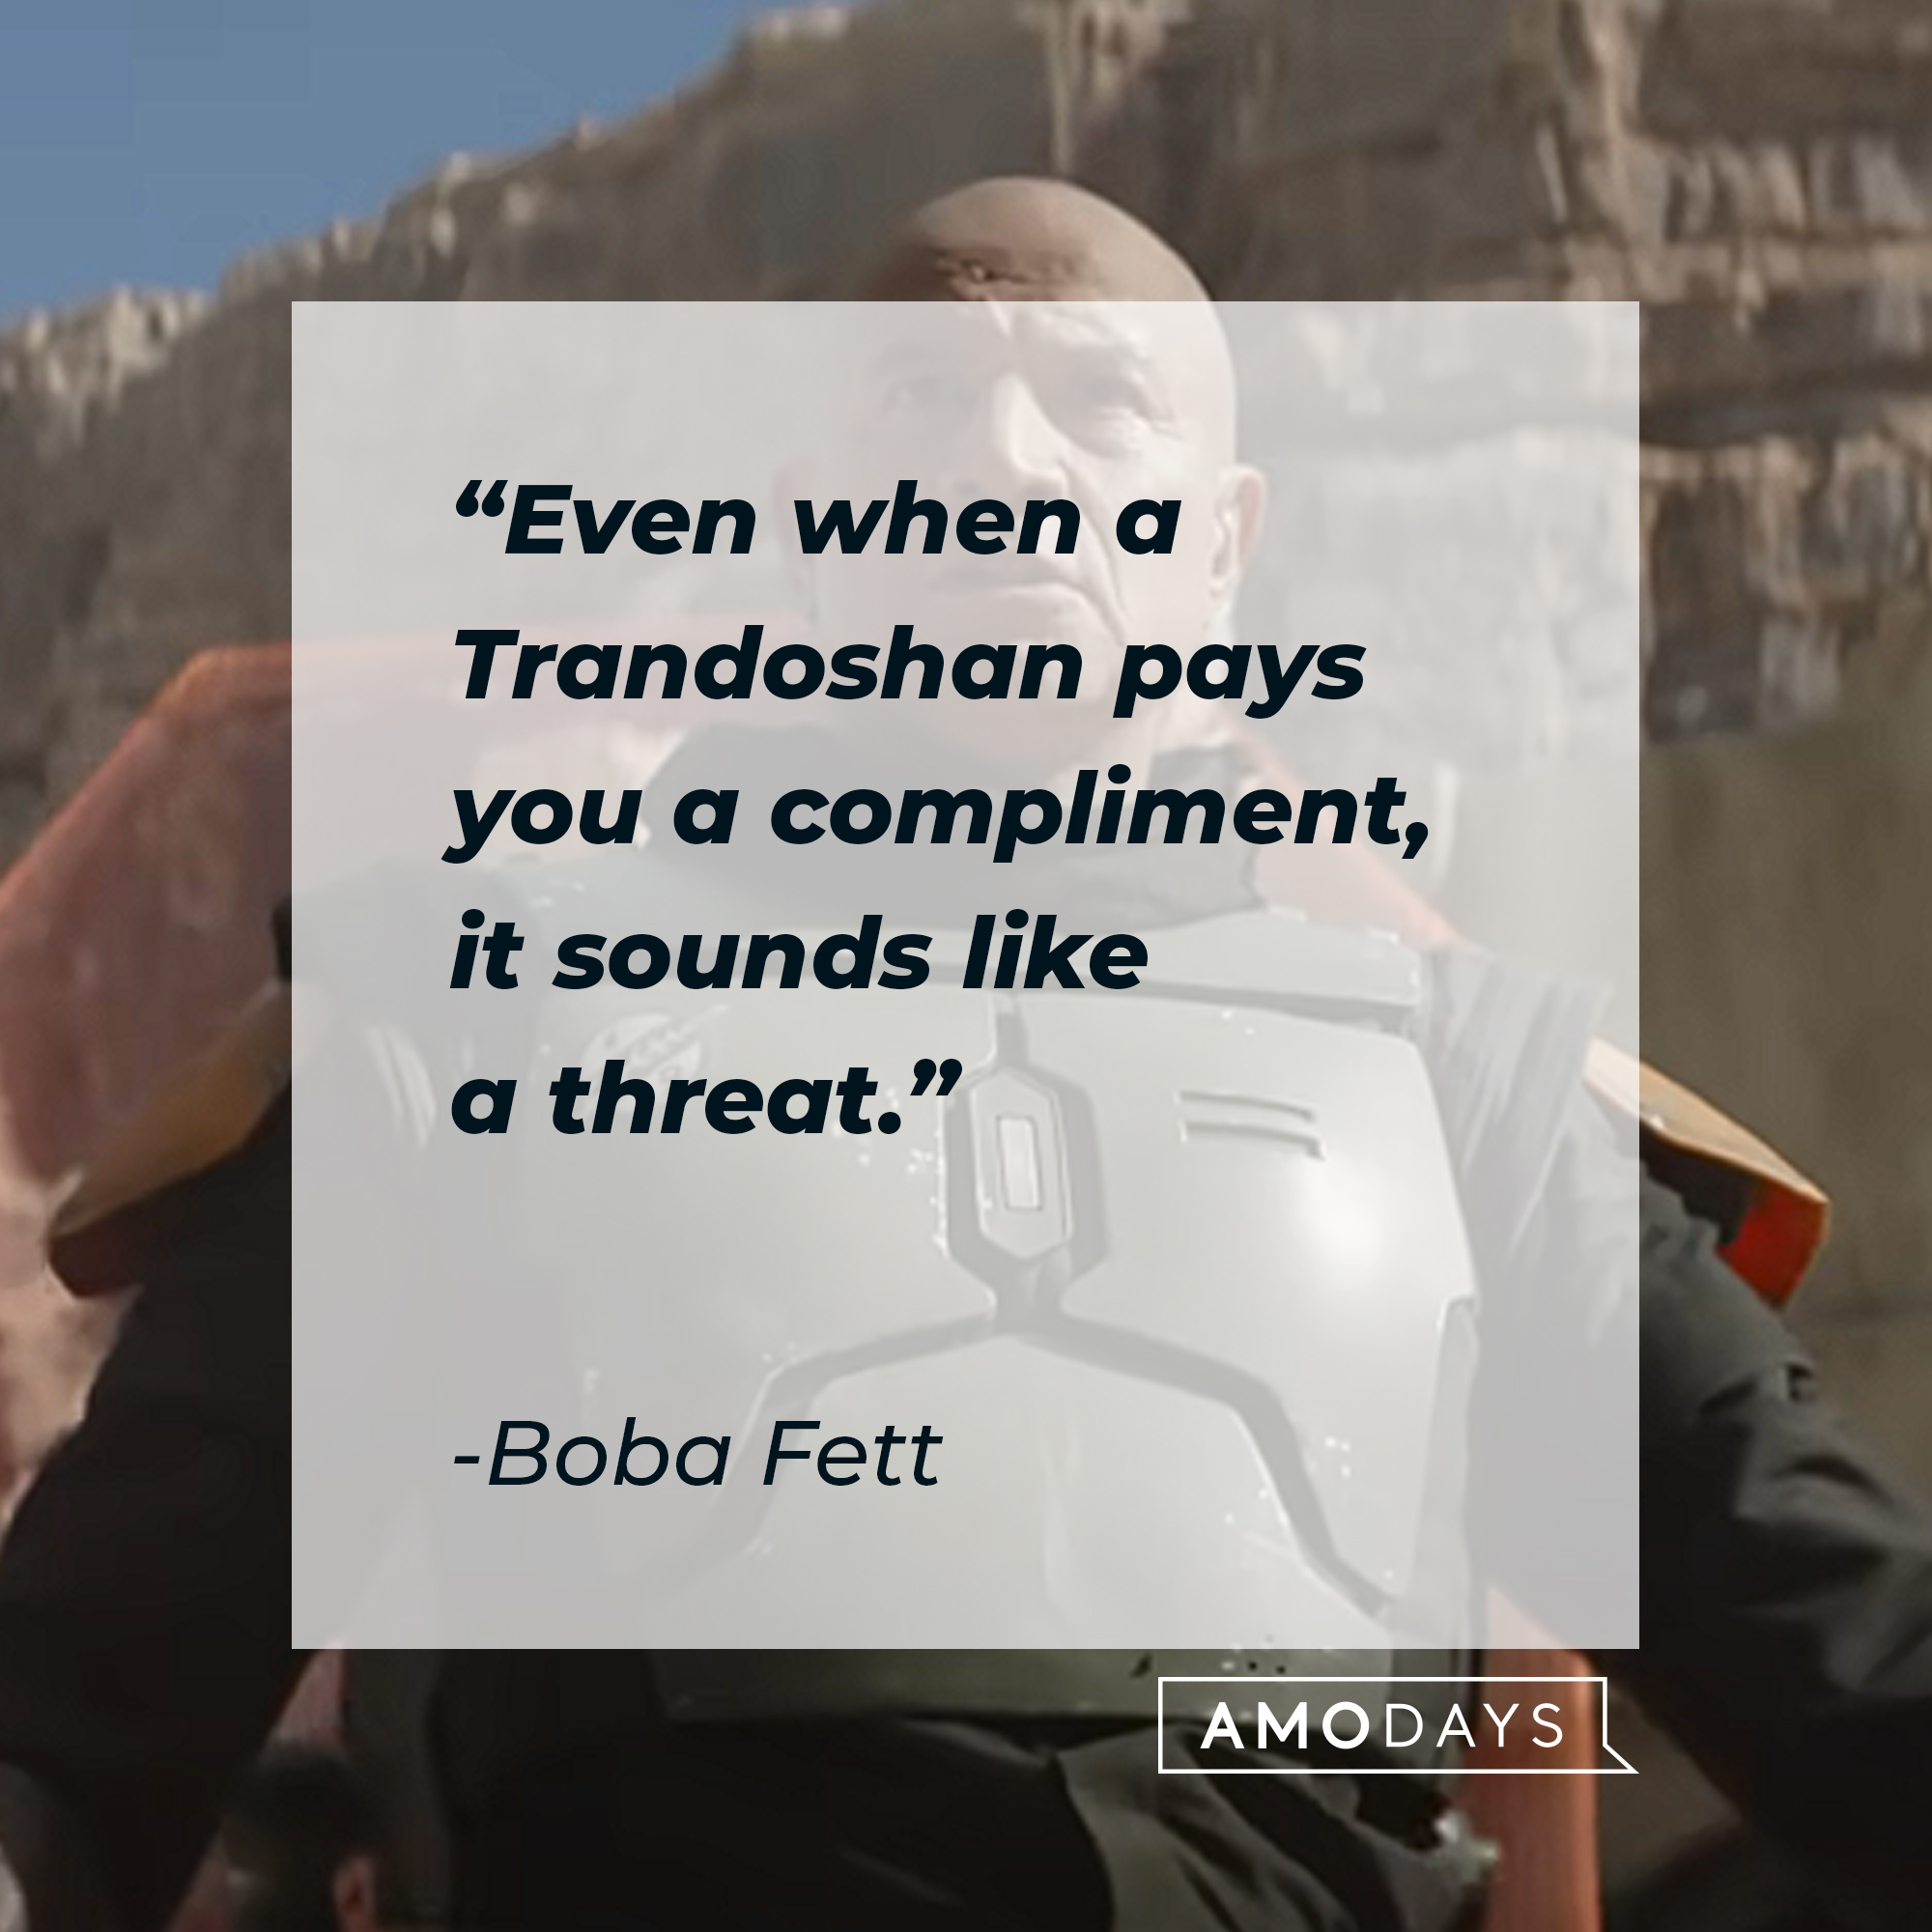 Boba Fett's quote: Even when a Trandoshan pays you a compliment, it sounds like a threat." | Source: youtube.com/StarWars